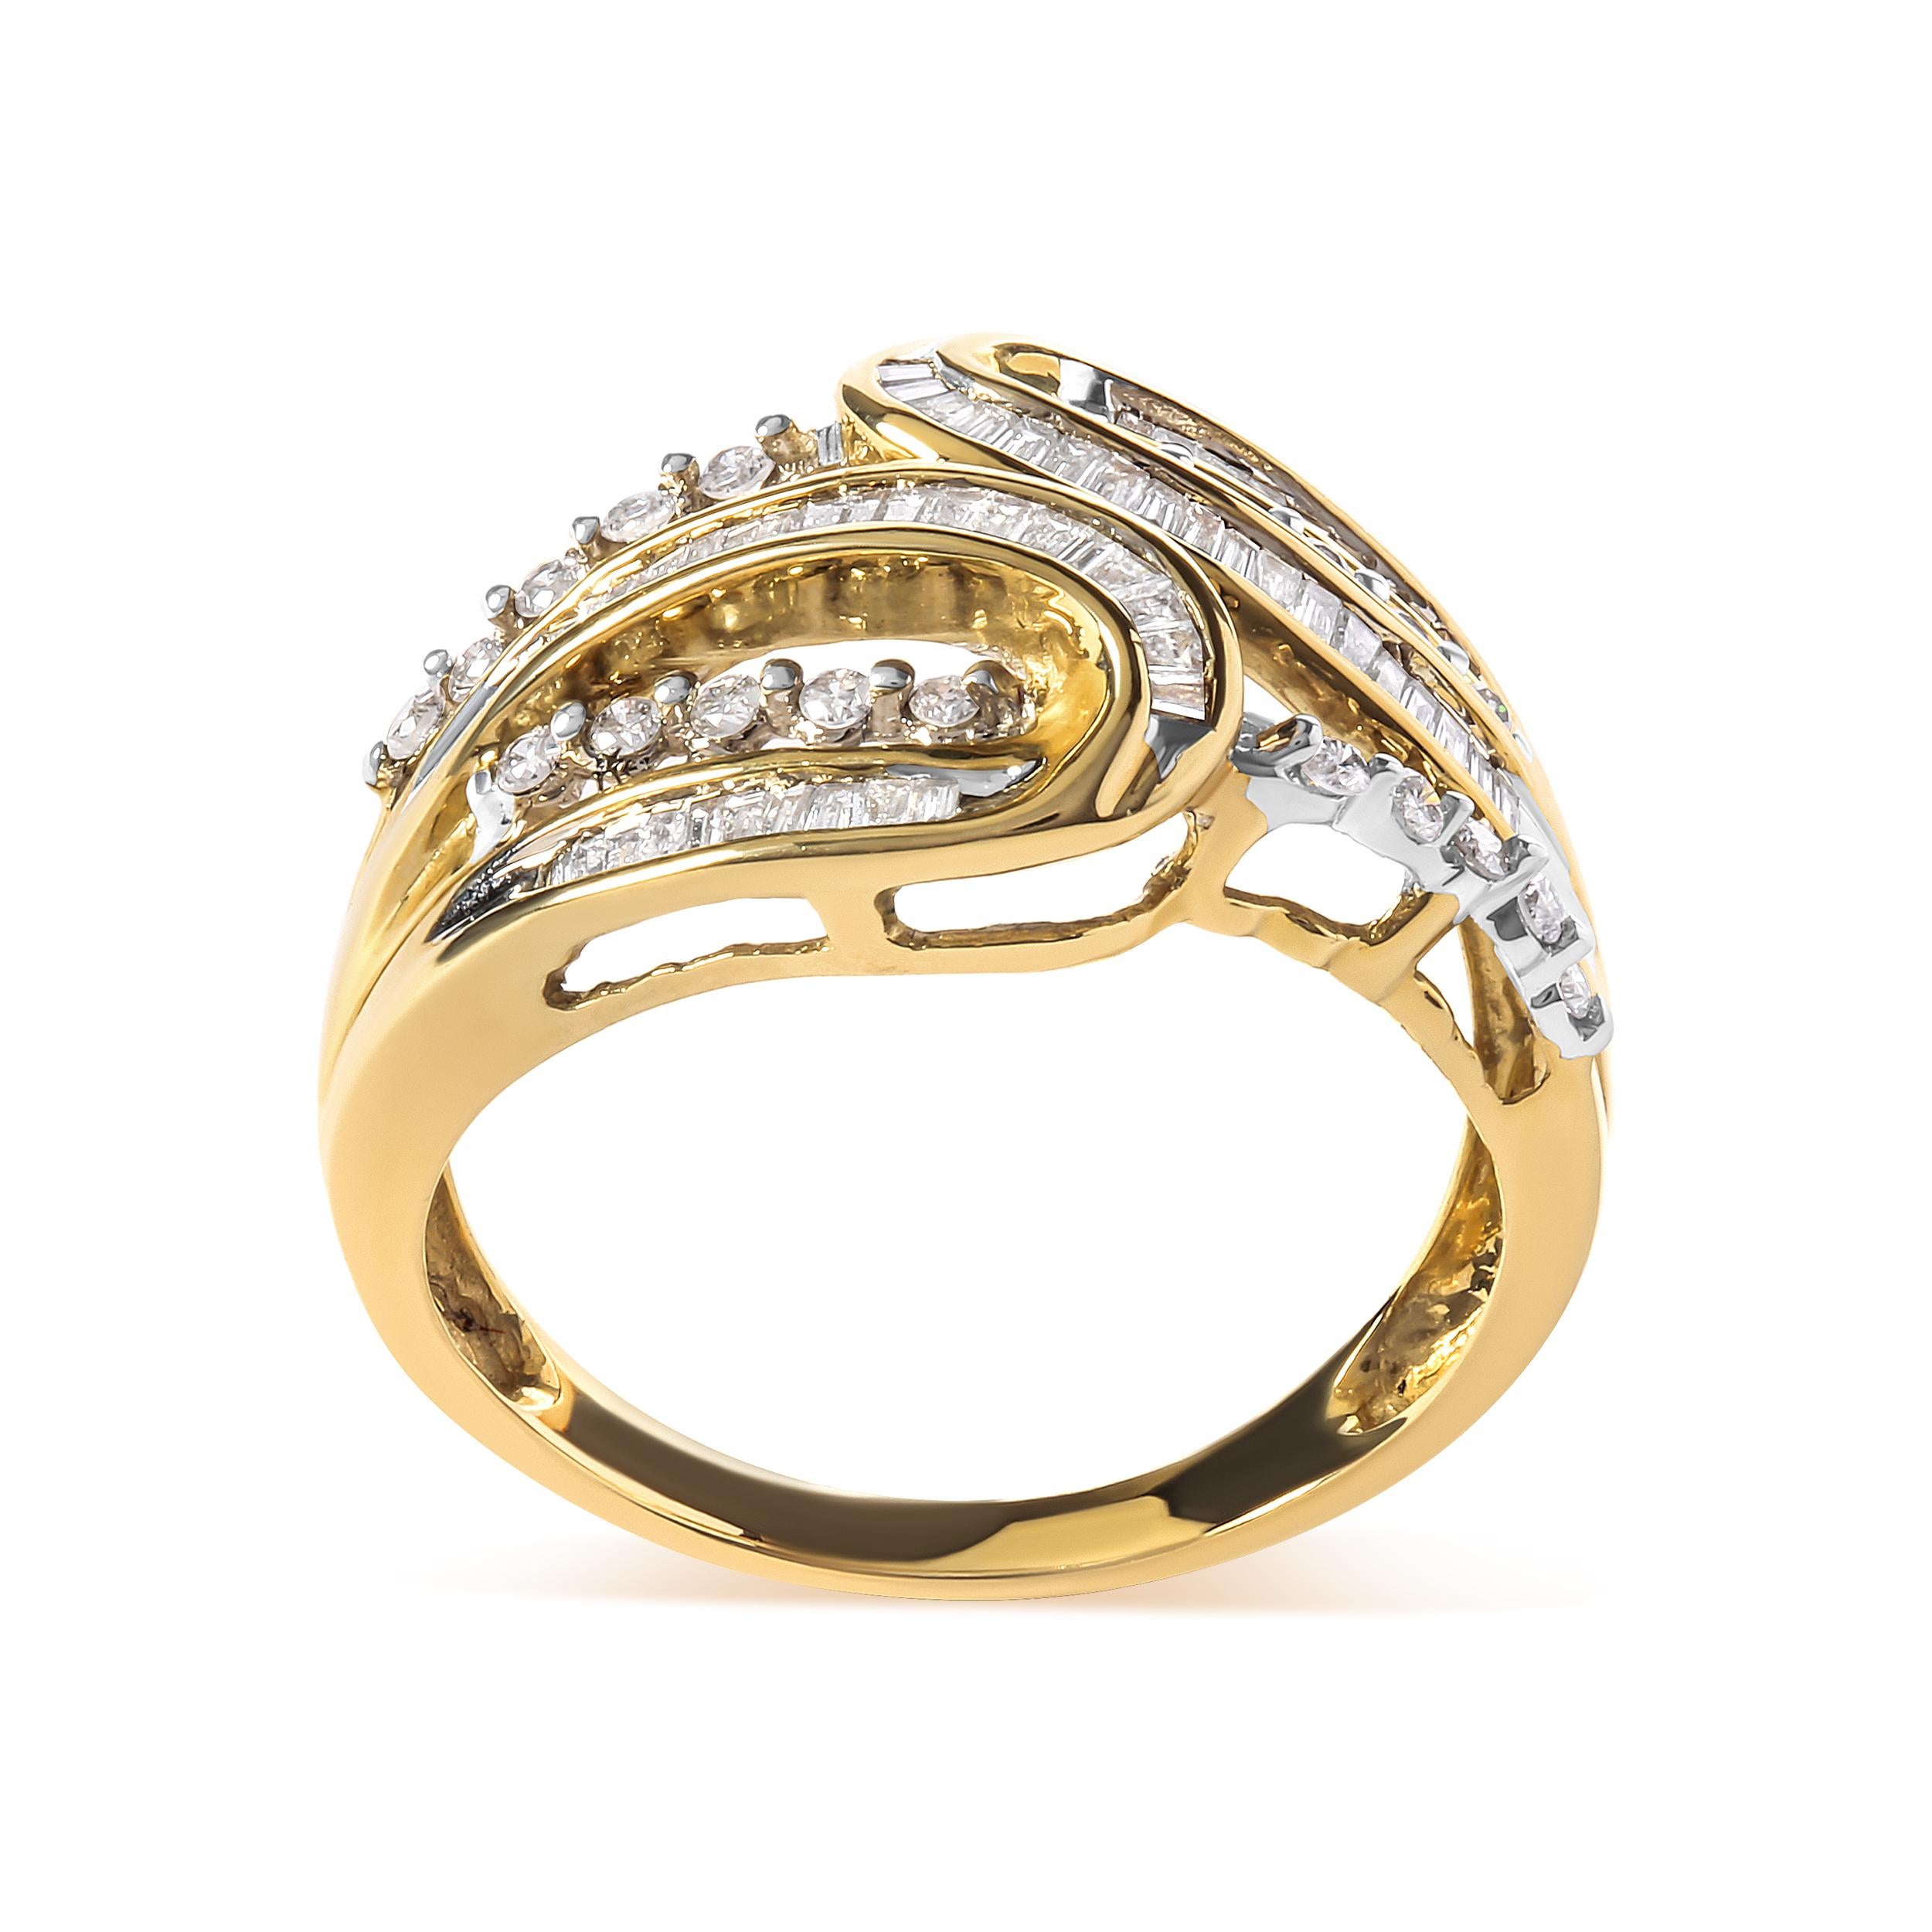 This stunning 10K yellow gold ring is the epitome of elegance and sophistication. With a unique open space bypass design, this ring is sure to turn heads. The round and baguette cut diamonds add a touch of glamour and sparkle, totaling 0.5 cttw and